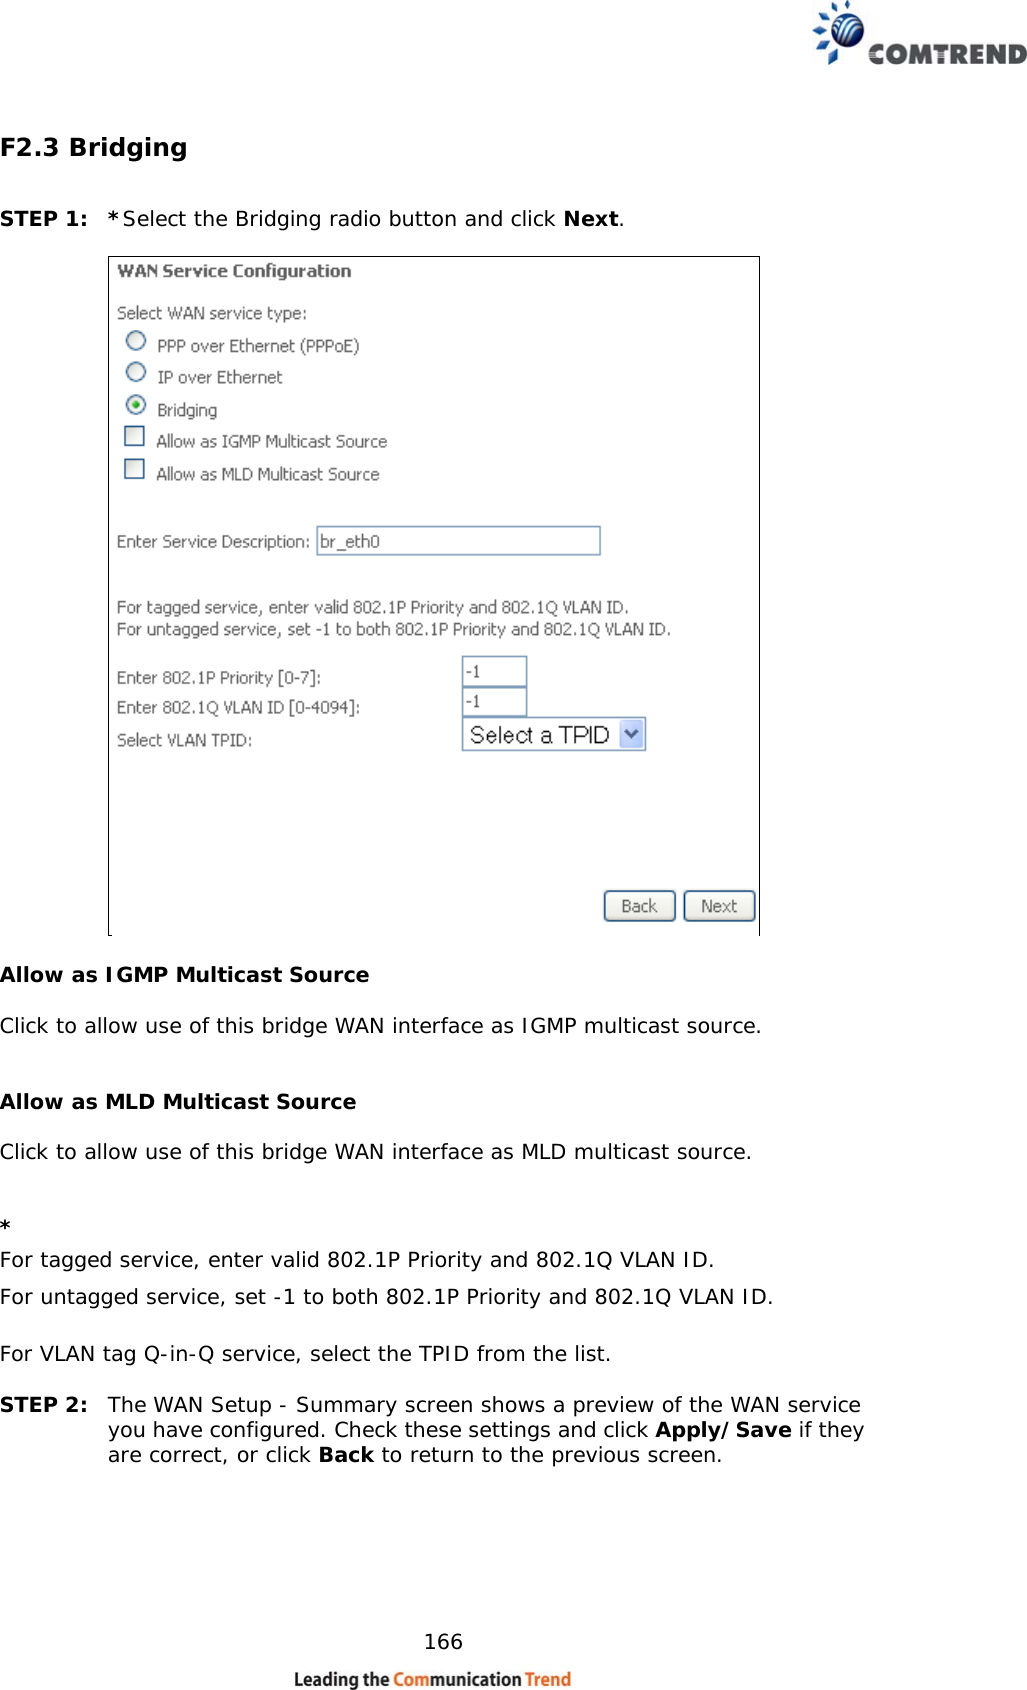    166 F2.3 Bridging  STEP 1:  *Select the Bridging radio button and click Next.        Allow as IGMP Multicast Source  Click to allow use of this bridge WAN interface as IGMP multicast source.   Allow as MLD Multicast Source   Click to allow use of this bridge WAN interface as MLD multicast source.   * For tagged service, enter valid 802.1P Priority and 802.1Q VLAN ID. For untagged service, set -1 to both 802.1P Priority and 802.1Q VLAN ID. For VLAN tag Q-in-Q service, select the TPID from the list.  STEP 2:  The WAN Setup - Summary screen shows a preview of the WAN service you have configured. Check these settings and click Apply/Save if they are correct, or click Back to return to the previous screen.  